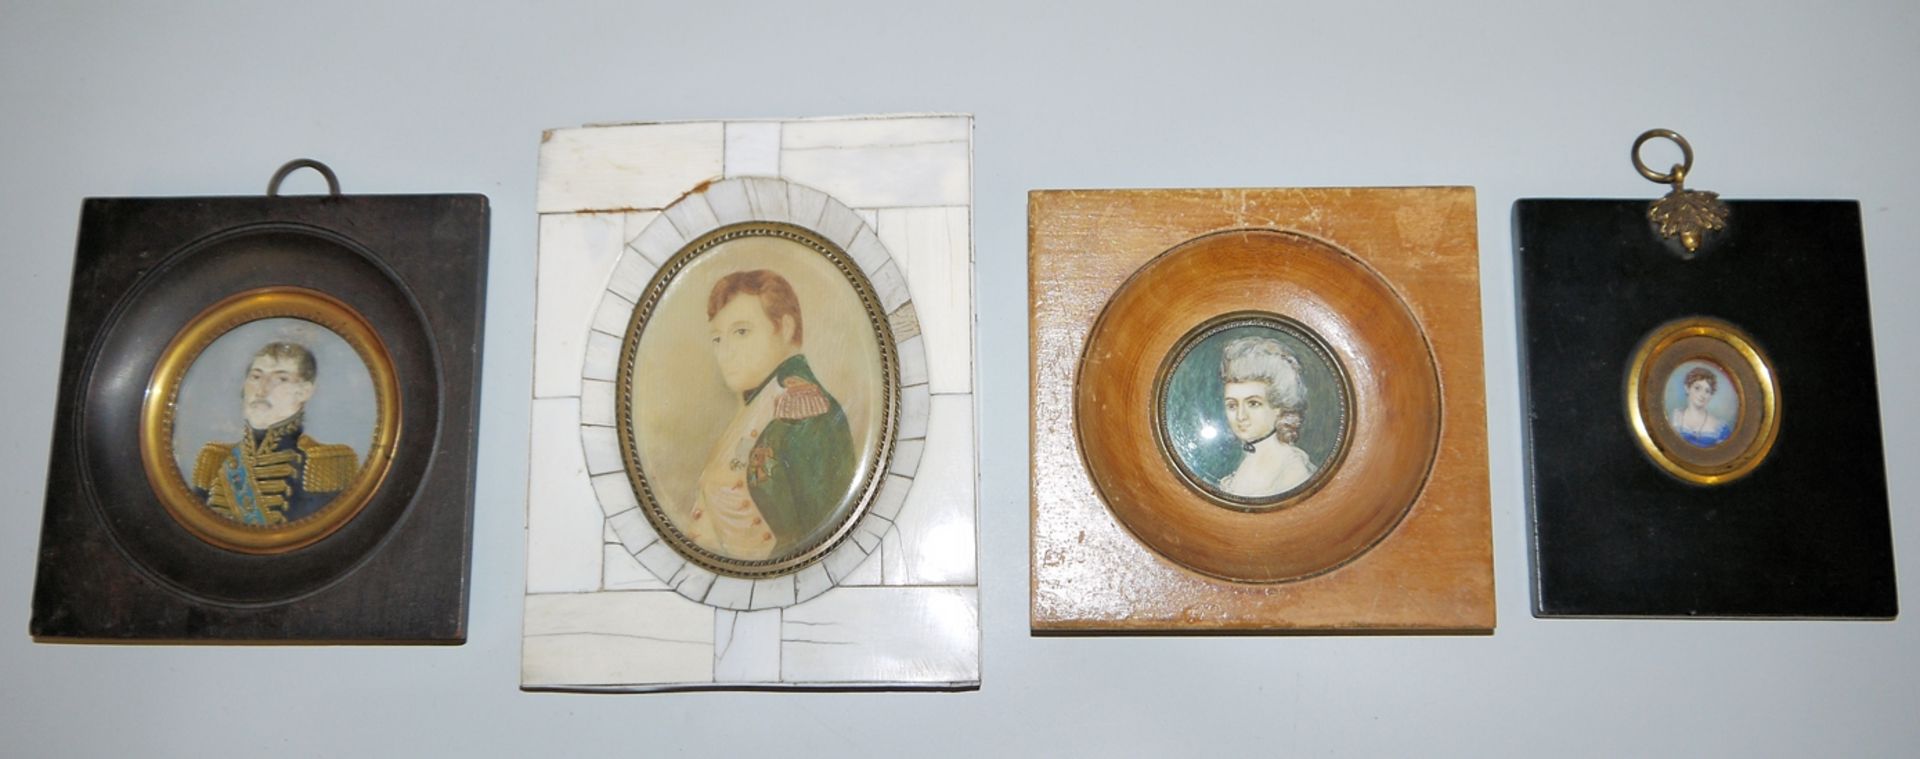 Collection estate with 12 miniatures from ca. 1800 - Image 4 of 4